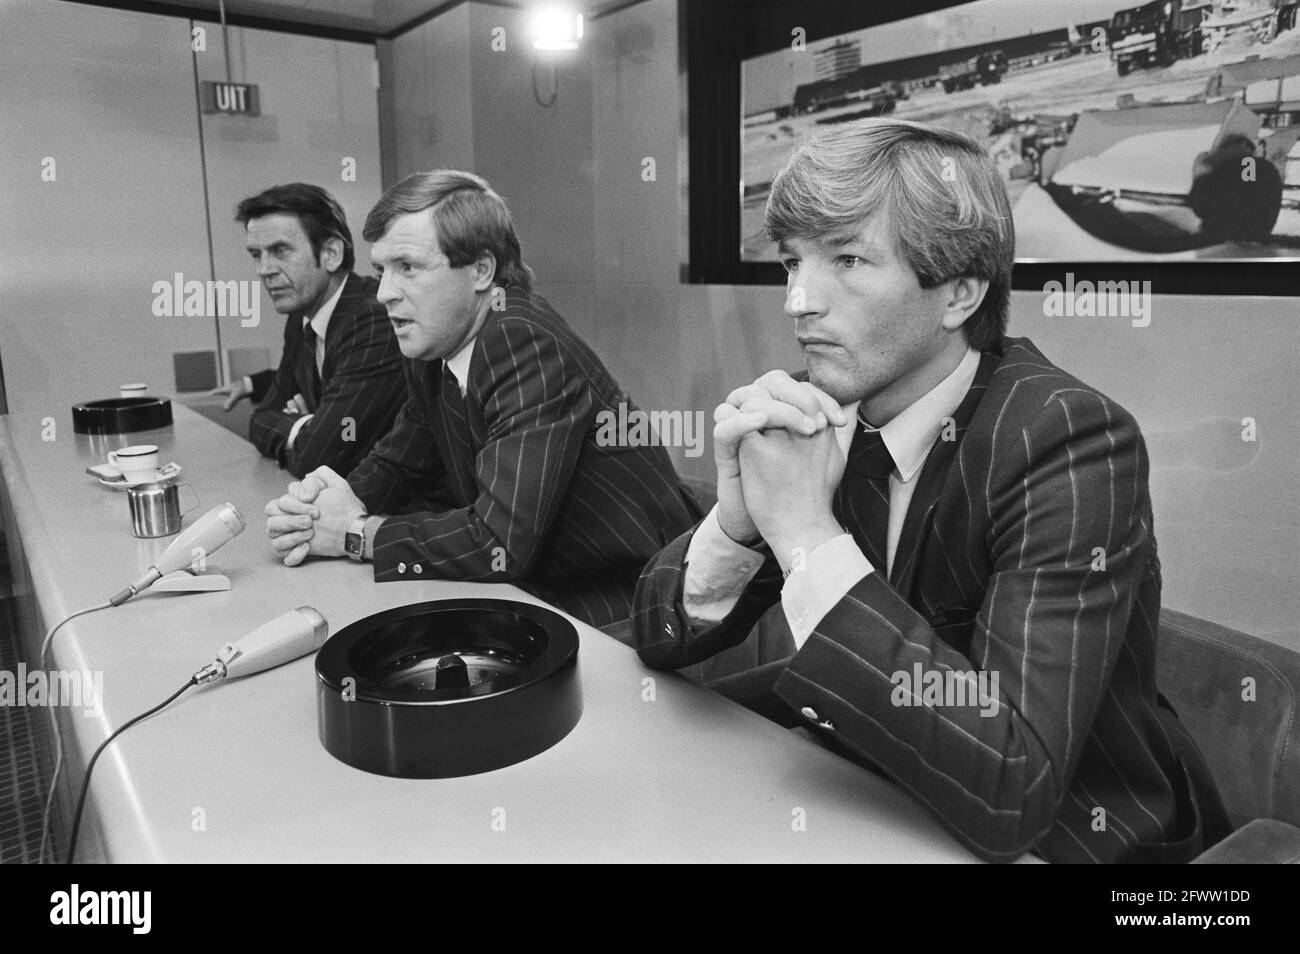 At Schiphol this morning the Dutch national team returned mini-wk in Uruguay, from left to right Zwartkruis, Vilé and Peters, January 8, 1981, teams, press conferences, sports, soccer, The Netherlands, 20th century press agency photo, news to remember, documentary, historic photography 1945-1990, visual stories, human history of the Twentieth Century, capturing moments in time Stock Photo